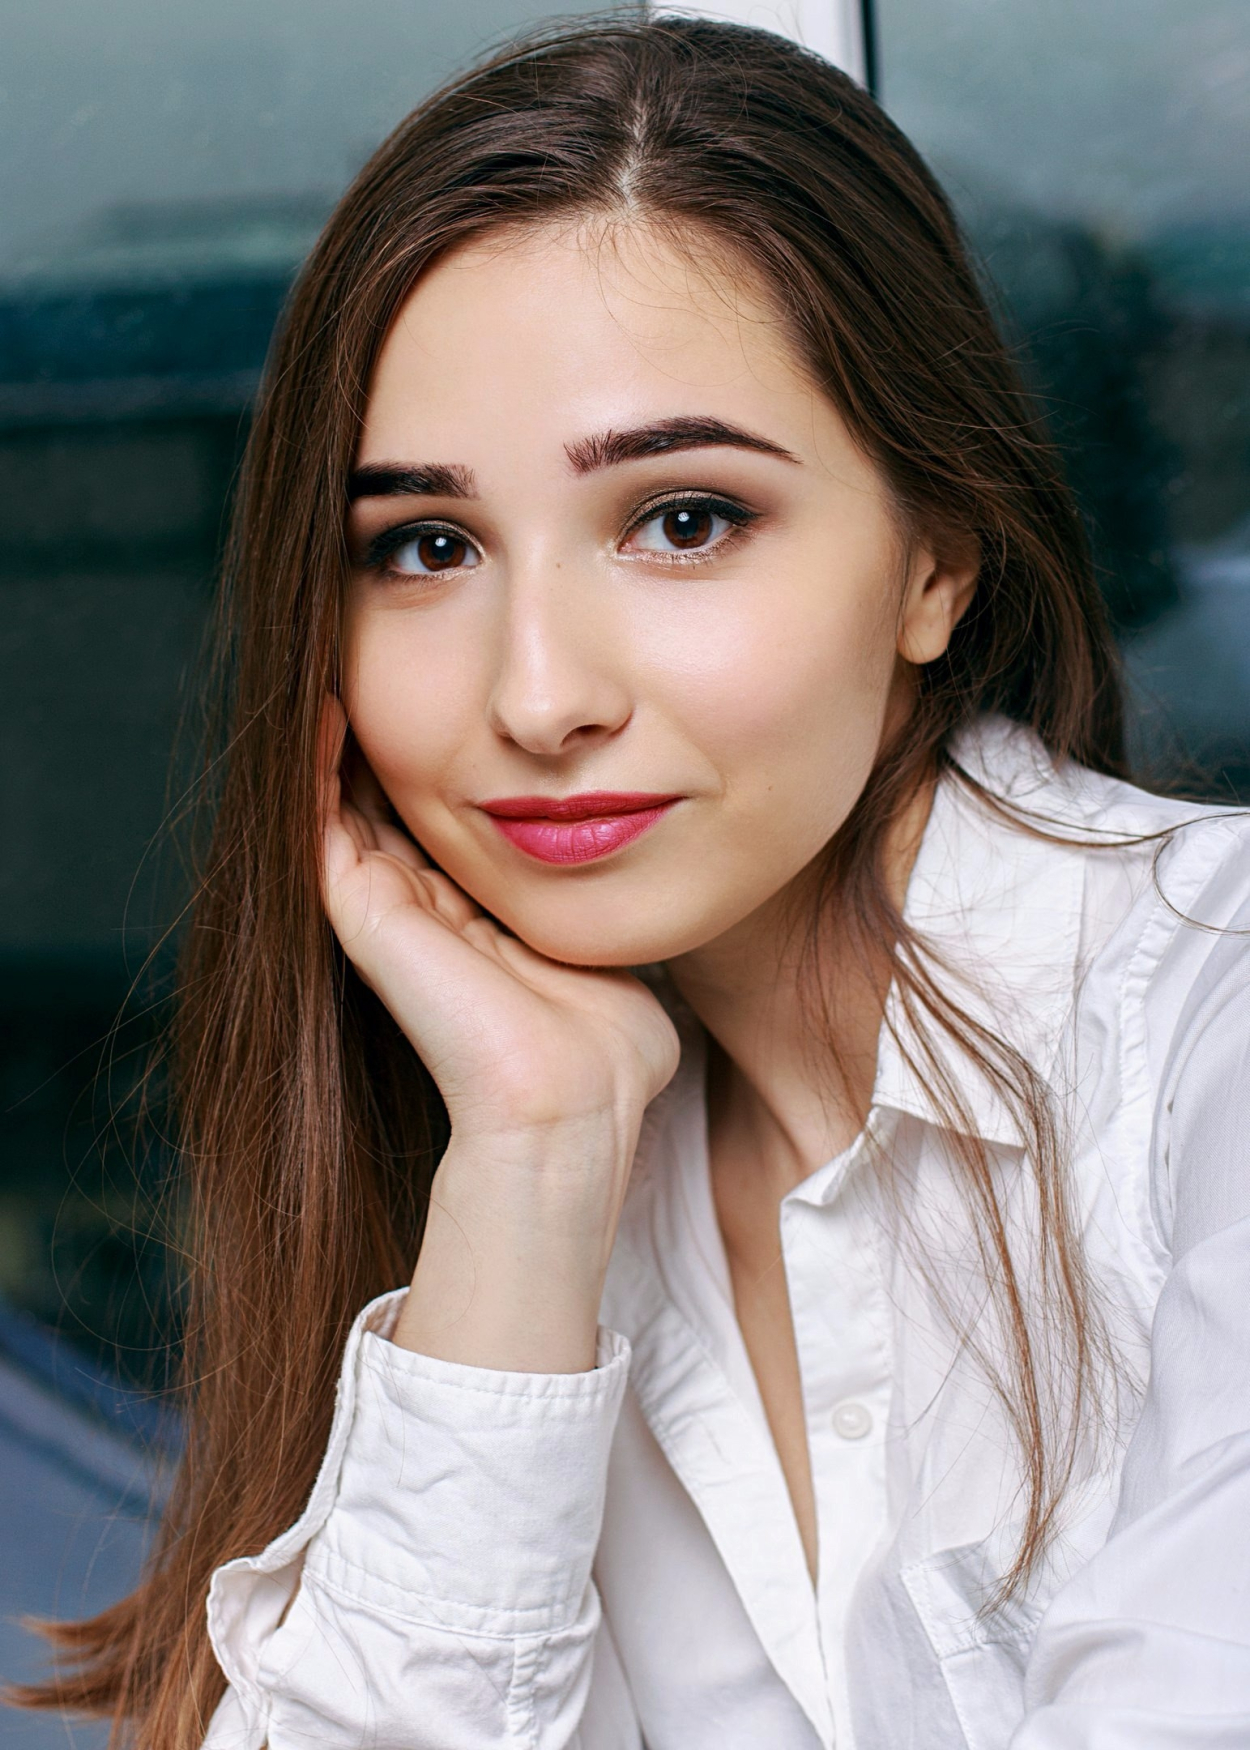 GSOM provides a lot of opportunities, the most important thing is not to be  afraid to use them,' – an interview with Ulyana Danyliv - St Petersburg  University